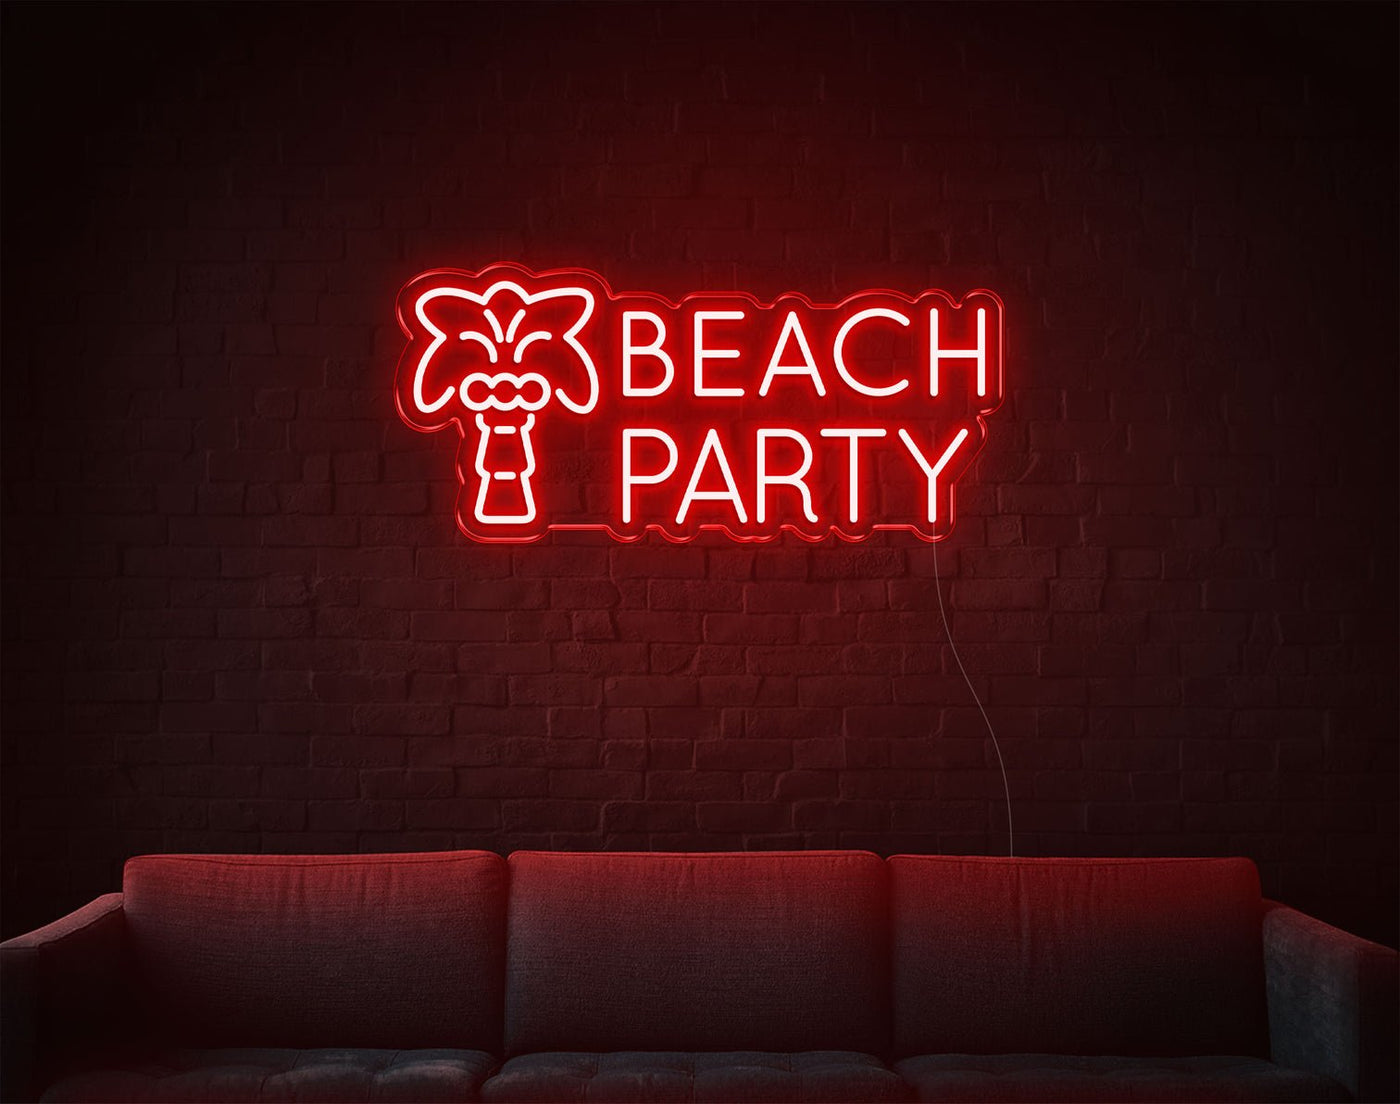 Beach Party LED Neon Sign - 12inch x 26inchRed